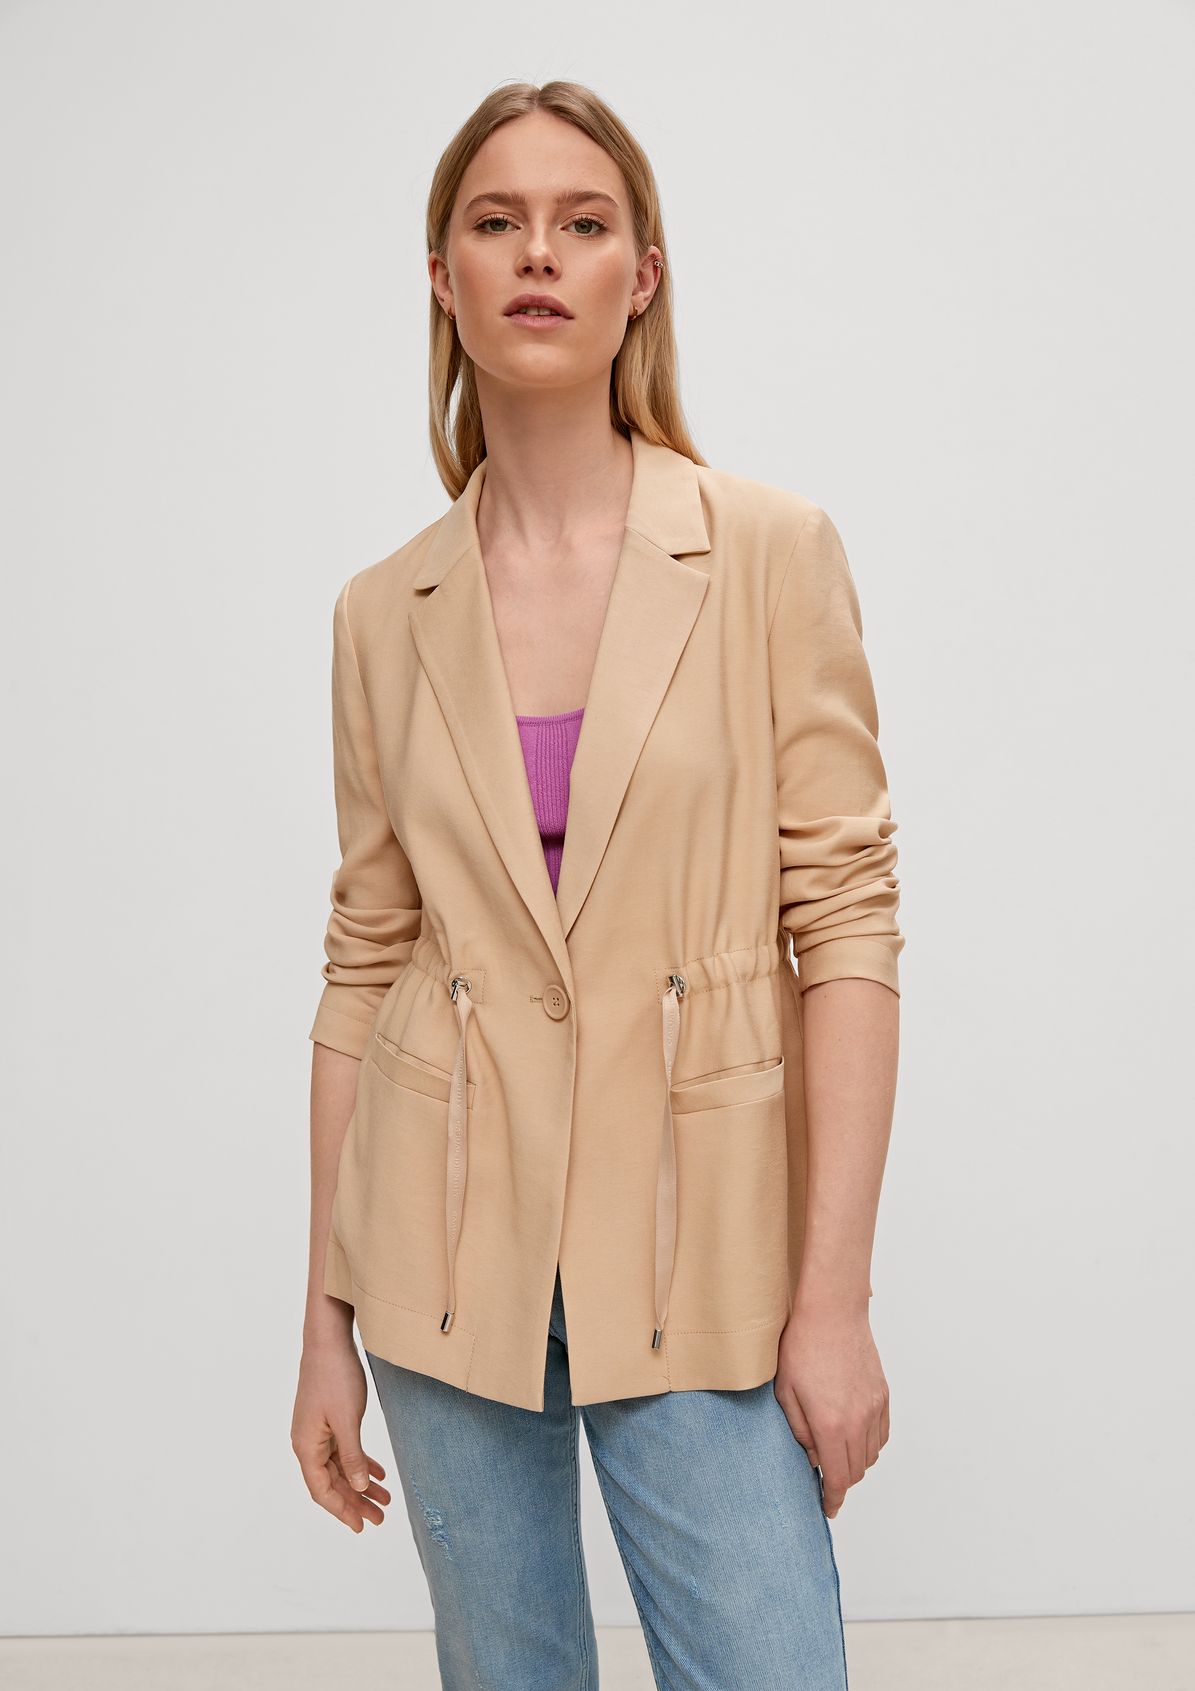 Blazer jacket with a drawstring from comma